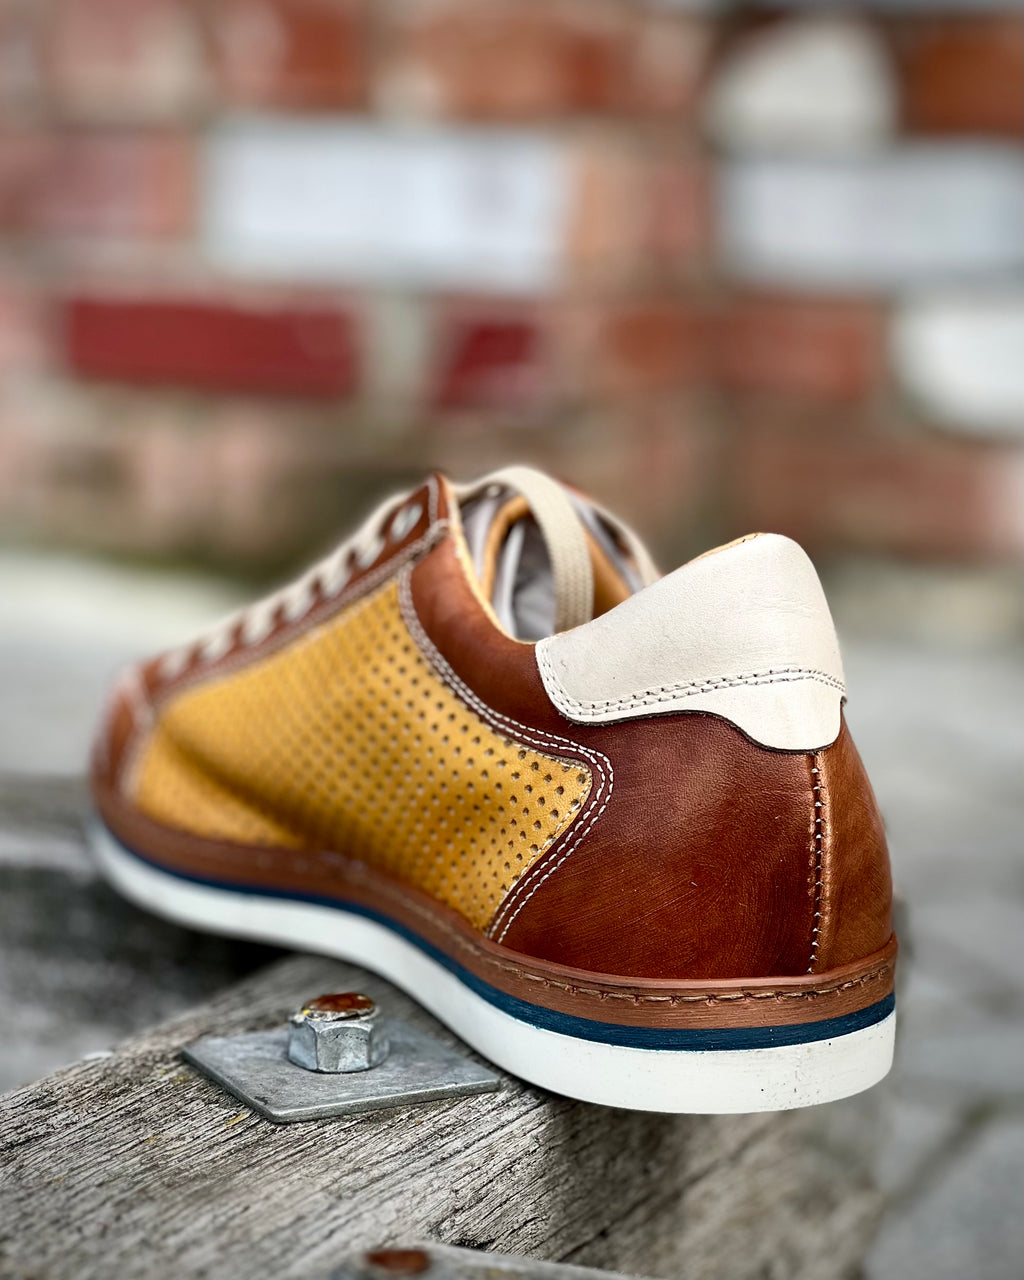 Sports style casual leather shoes by Italiano - back view